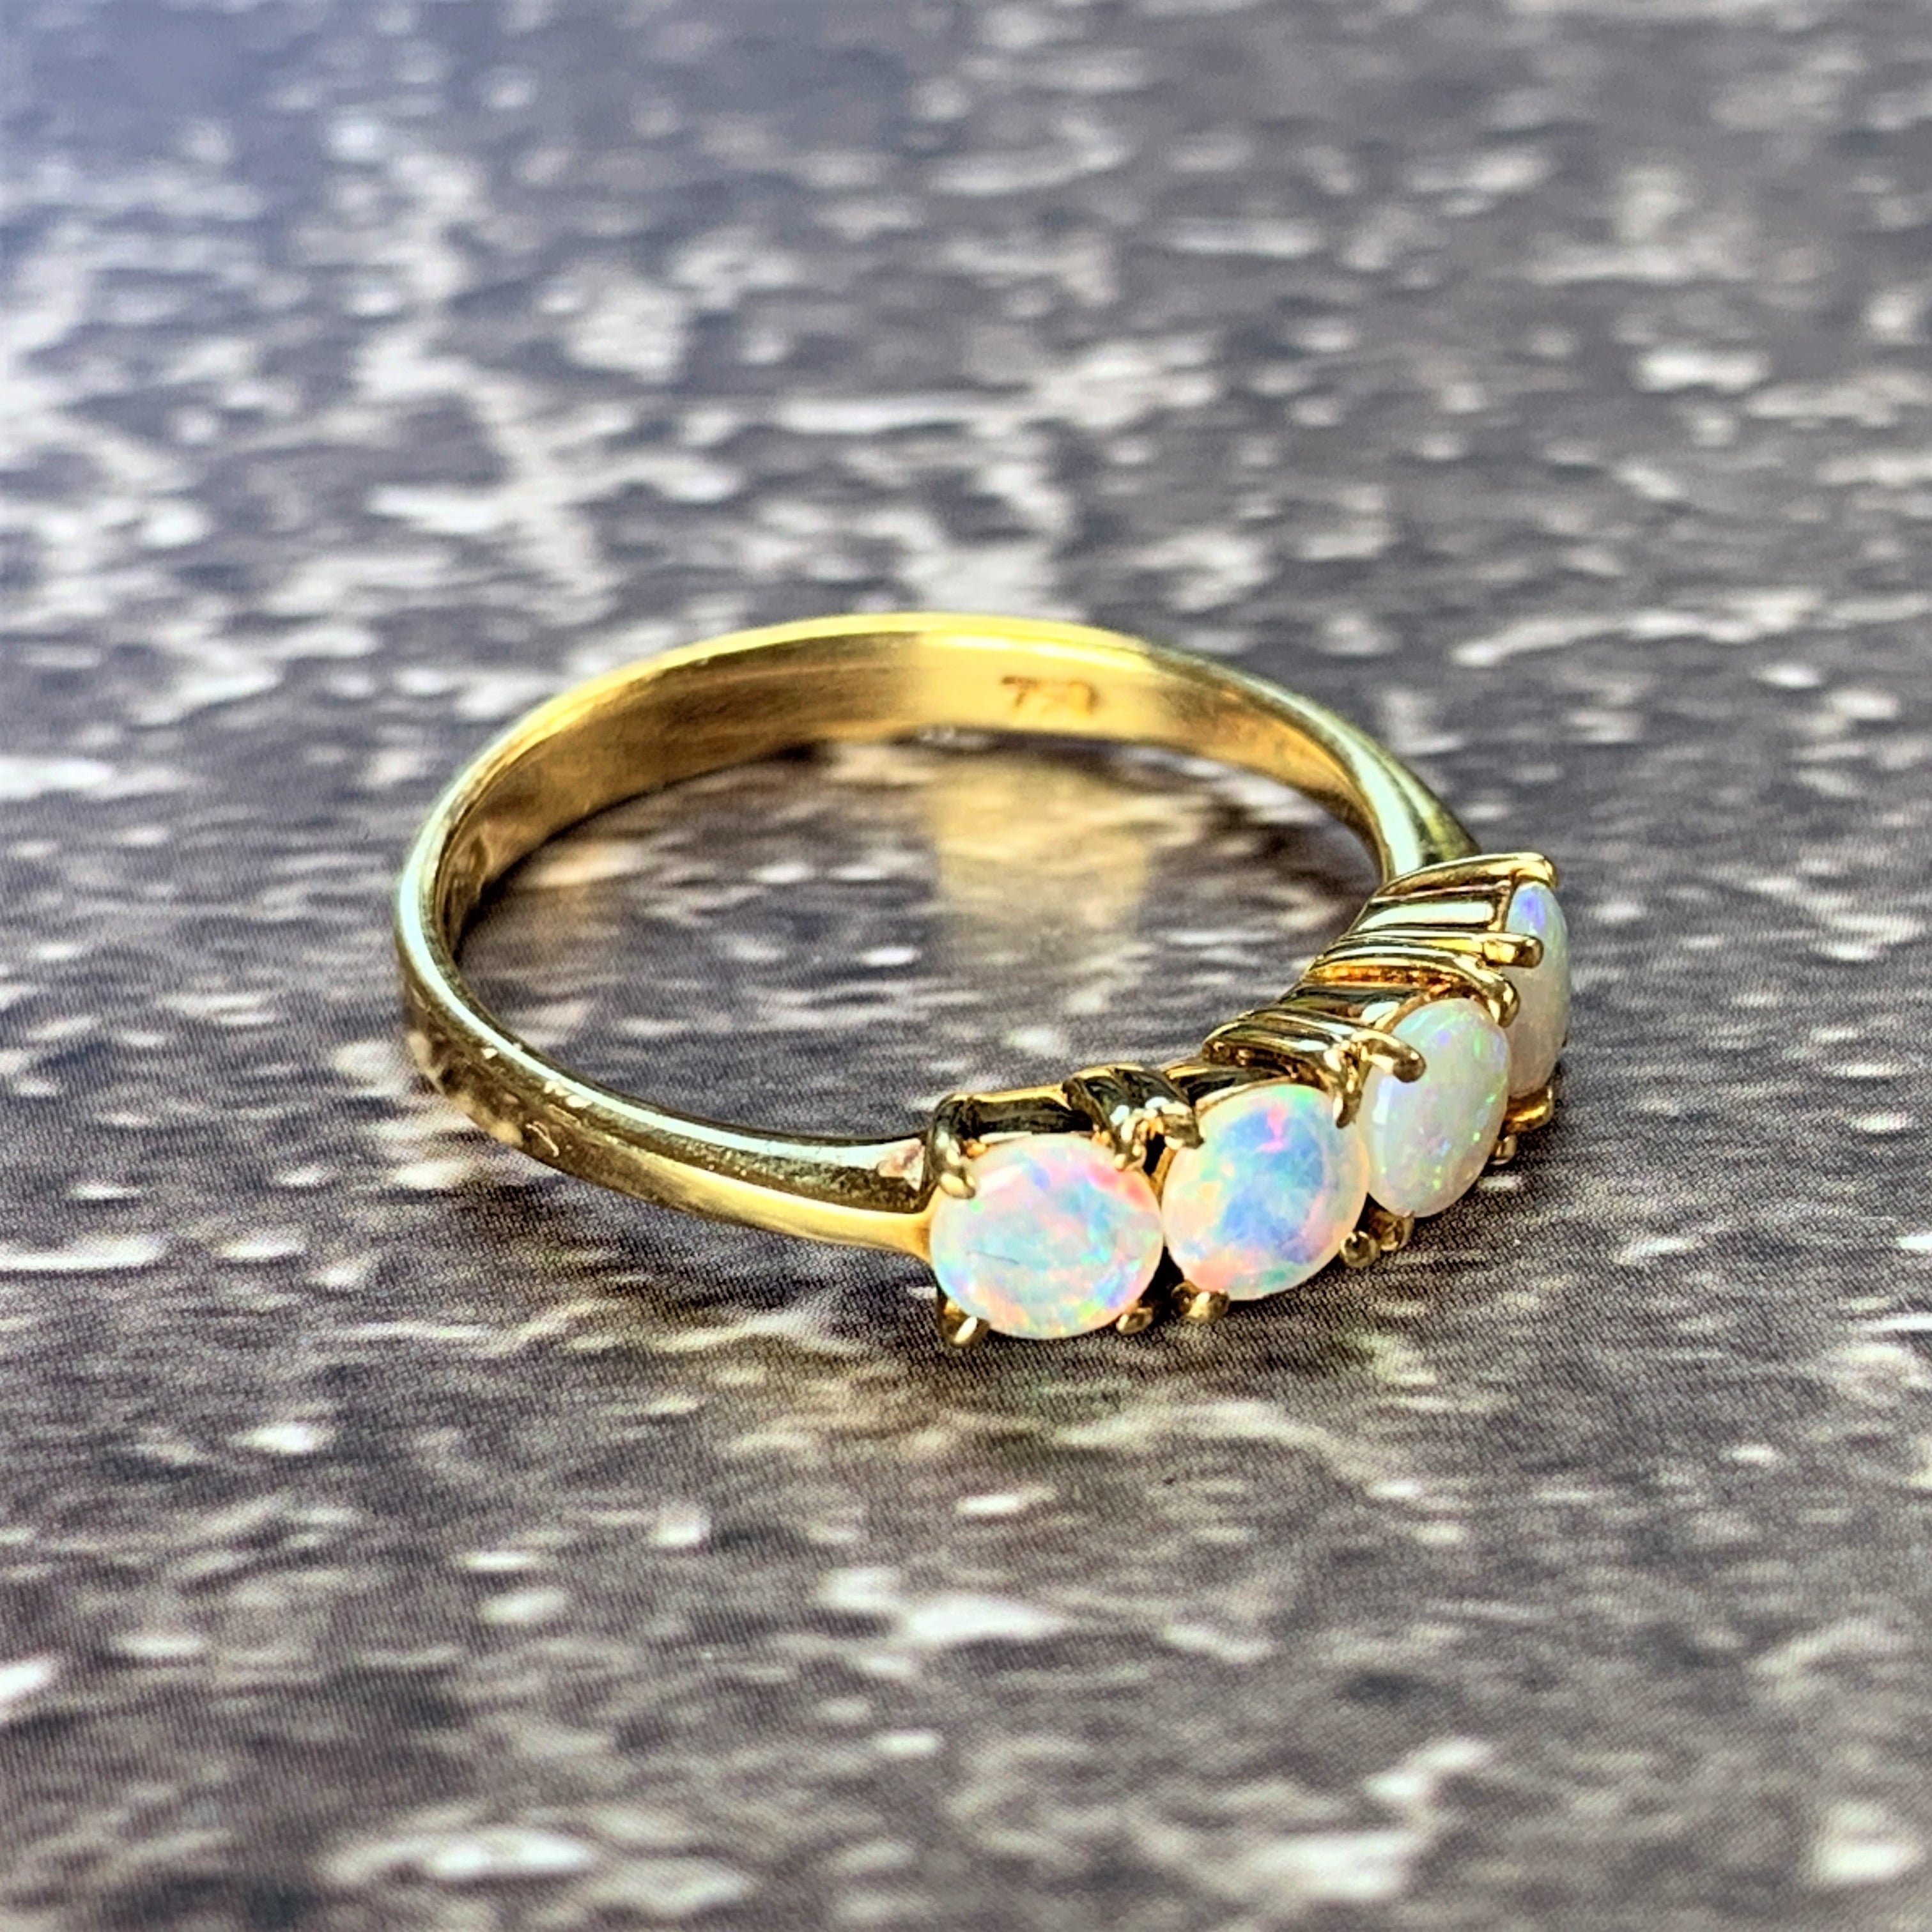 18kt Yellow Gold eternity ring with 5 Crystal Opals - Masterpiece Jewellery Opal & Gems Sydney Australia | Online Shop